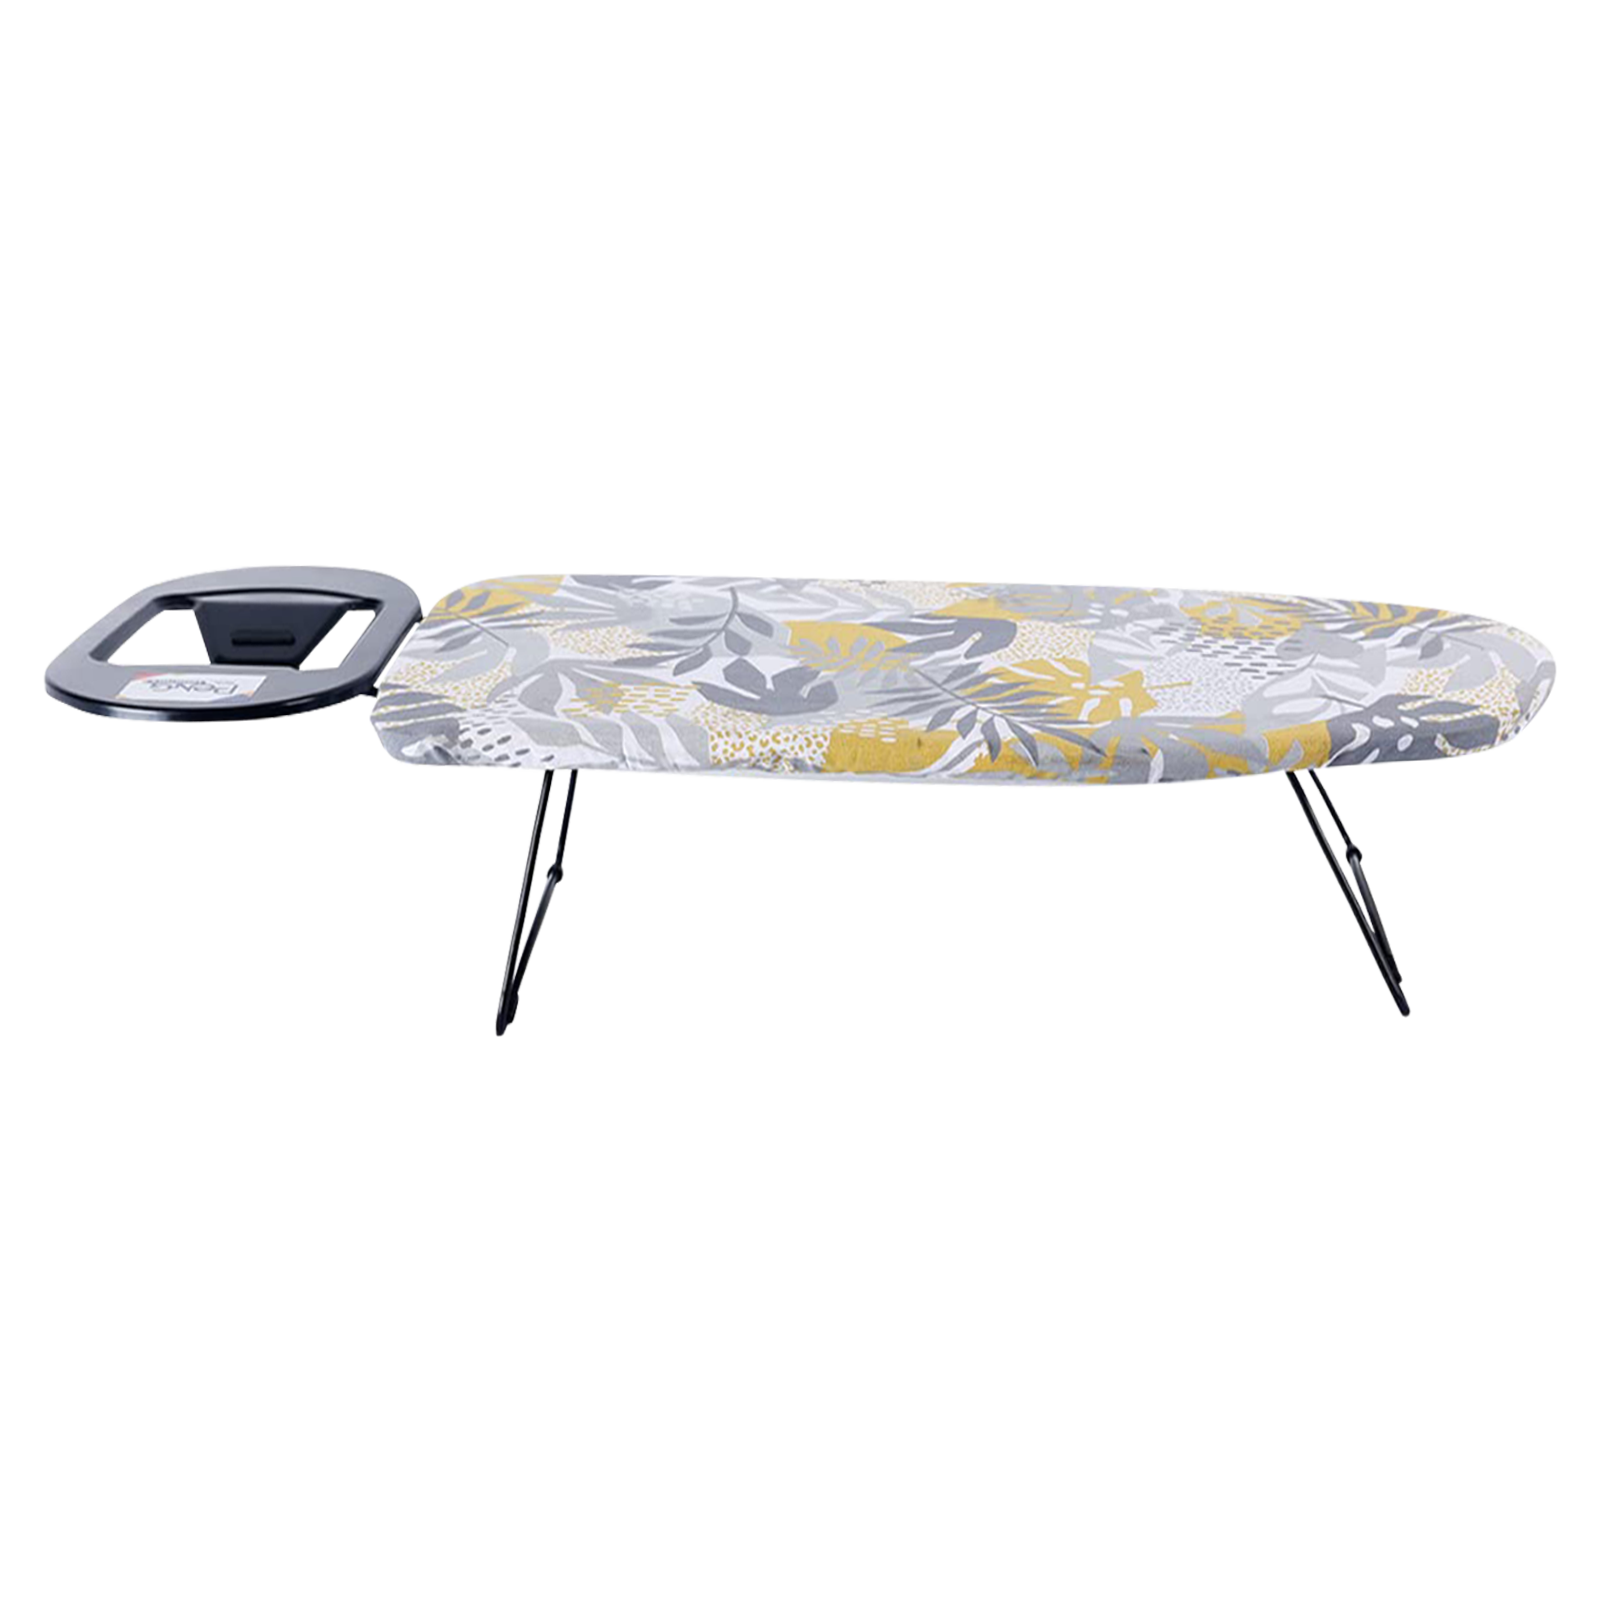 Peng Essentials Ironing Board (Silicone Iron Rest, Floral_IB_L3, Multicolor)